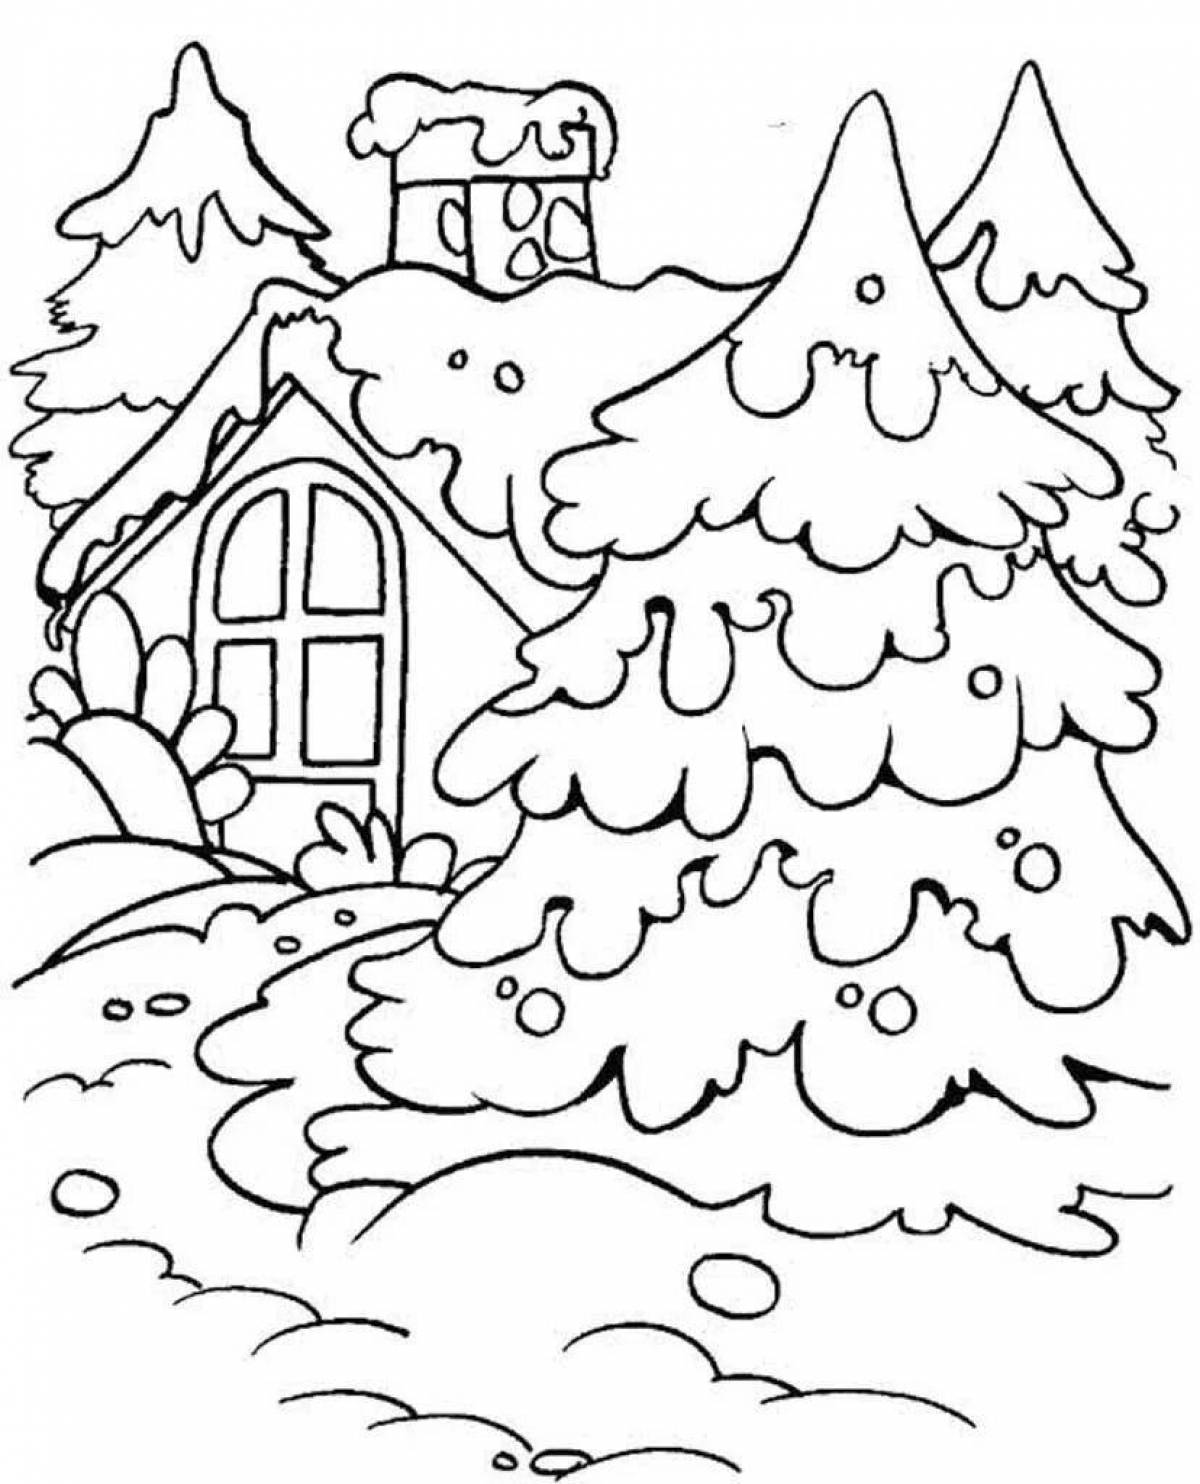 Live winter forest coloring book for 5-6 year olds